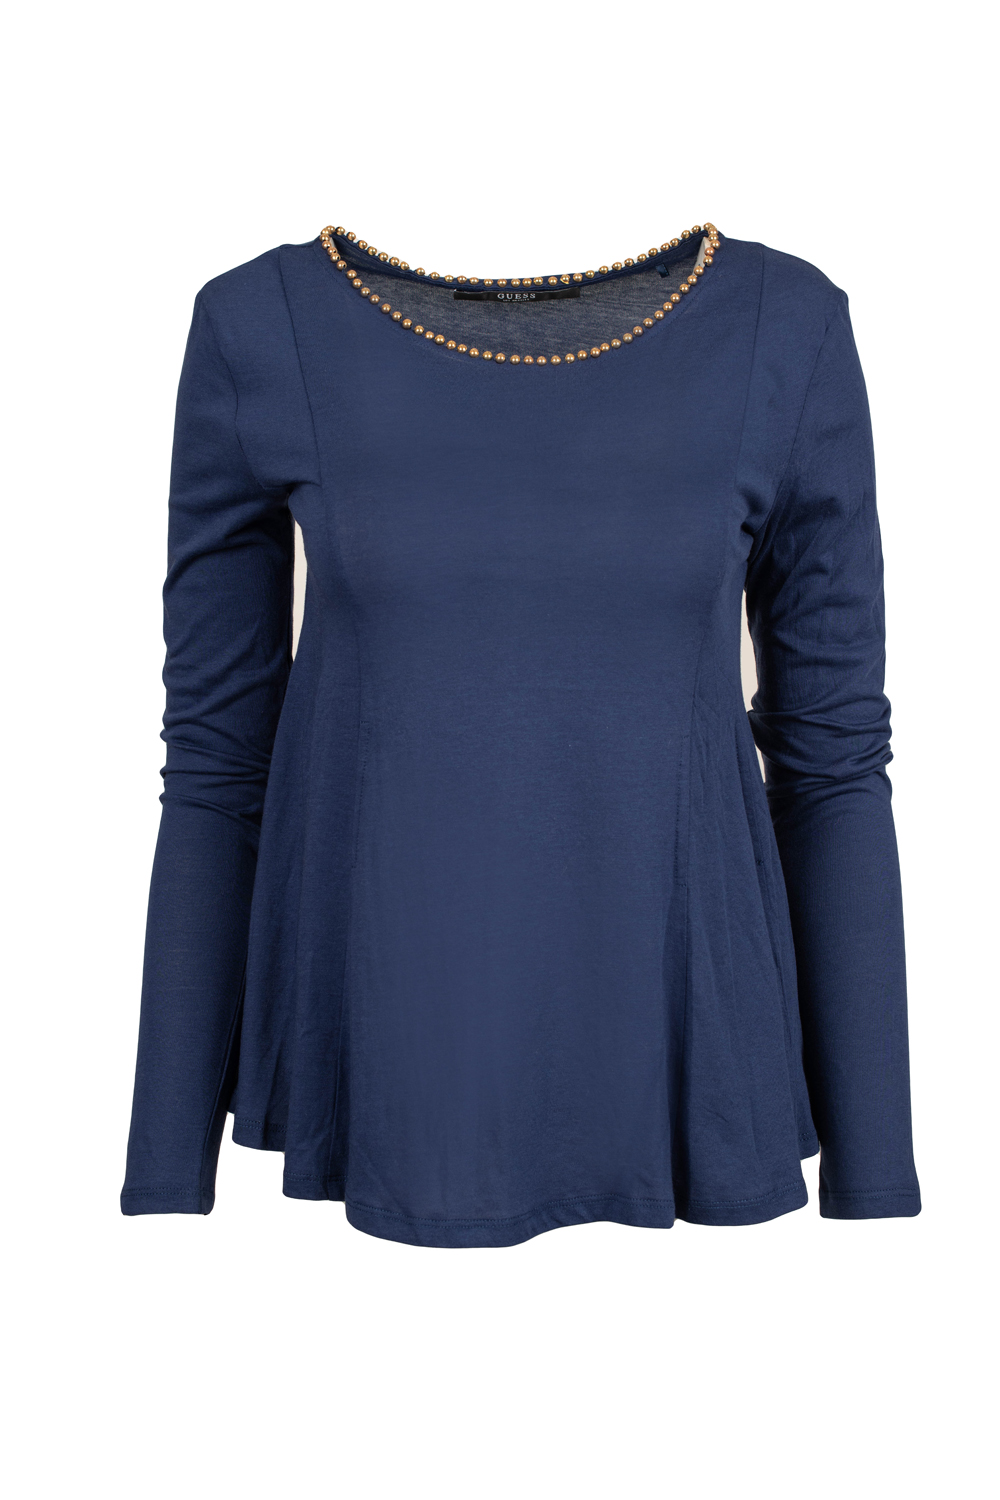 Fit and Flare Blouse with Neckline Detail